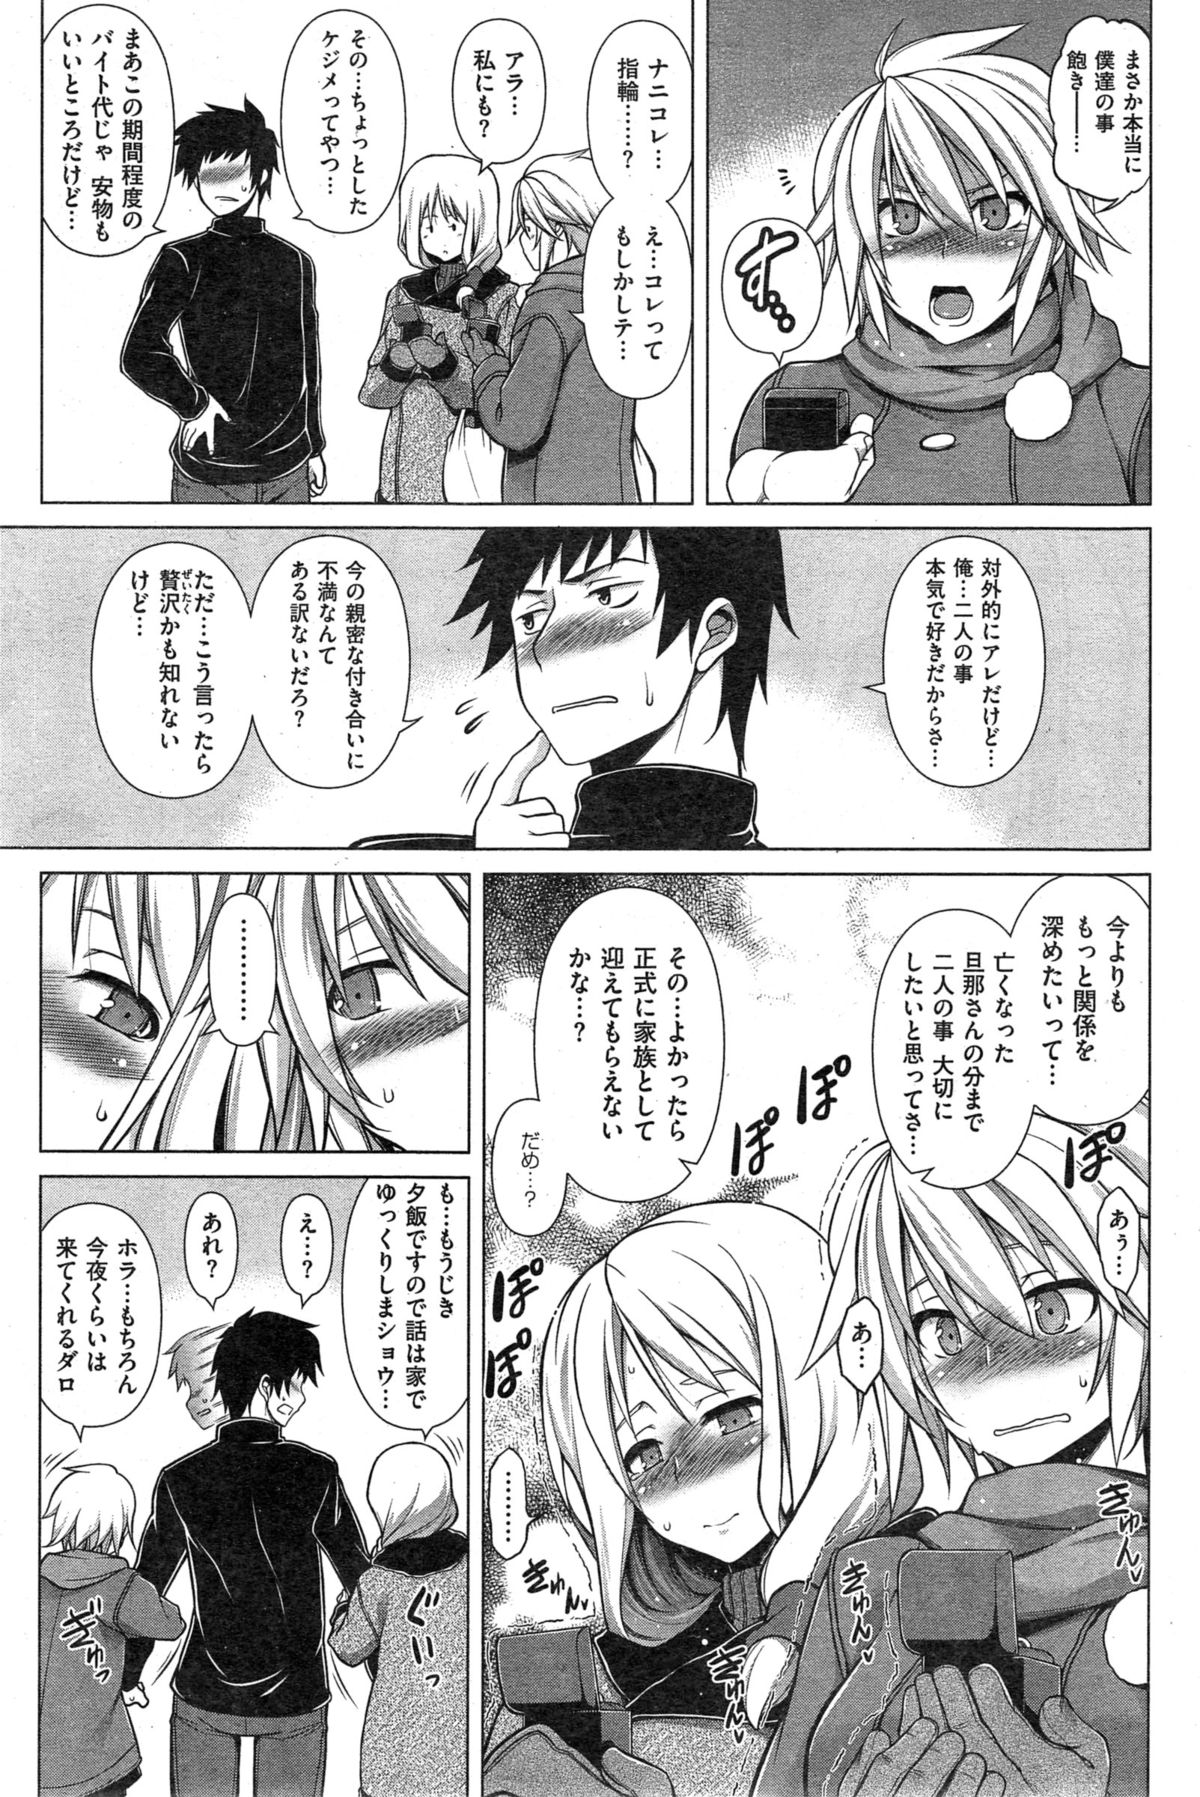 [TANABE] Ougon Taiken - Gold Experience page 23 full